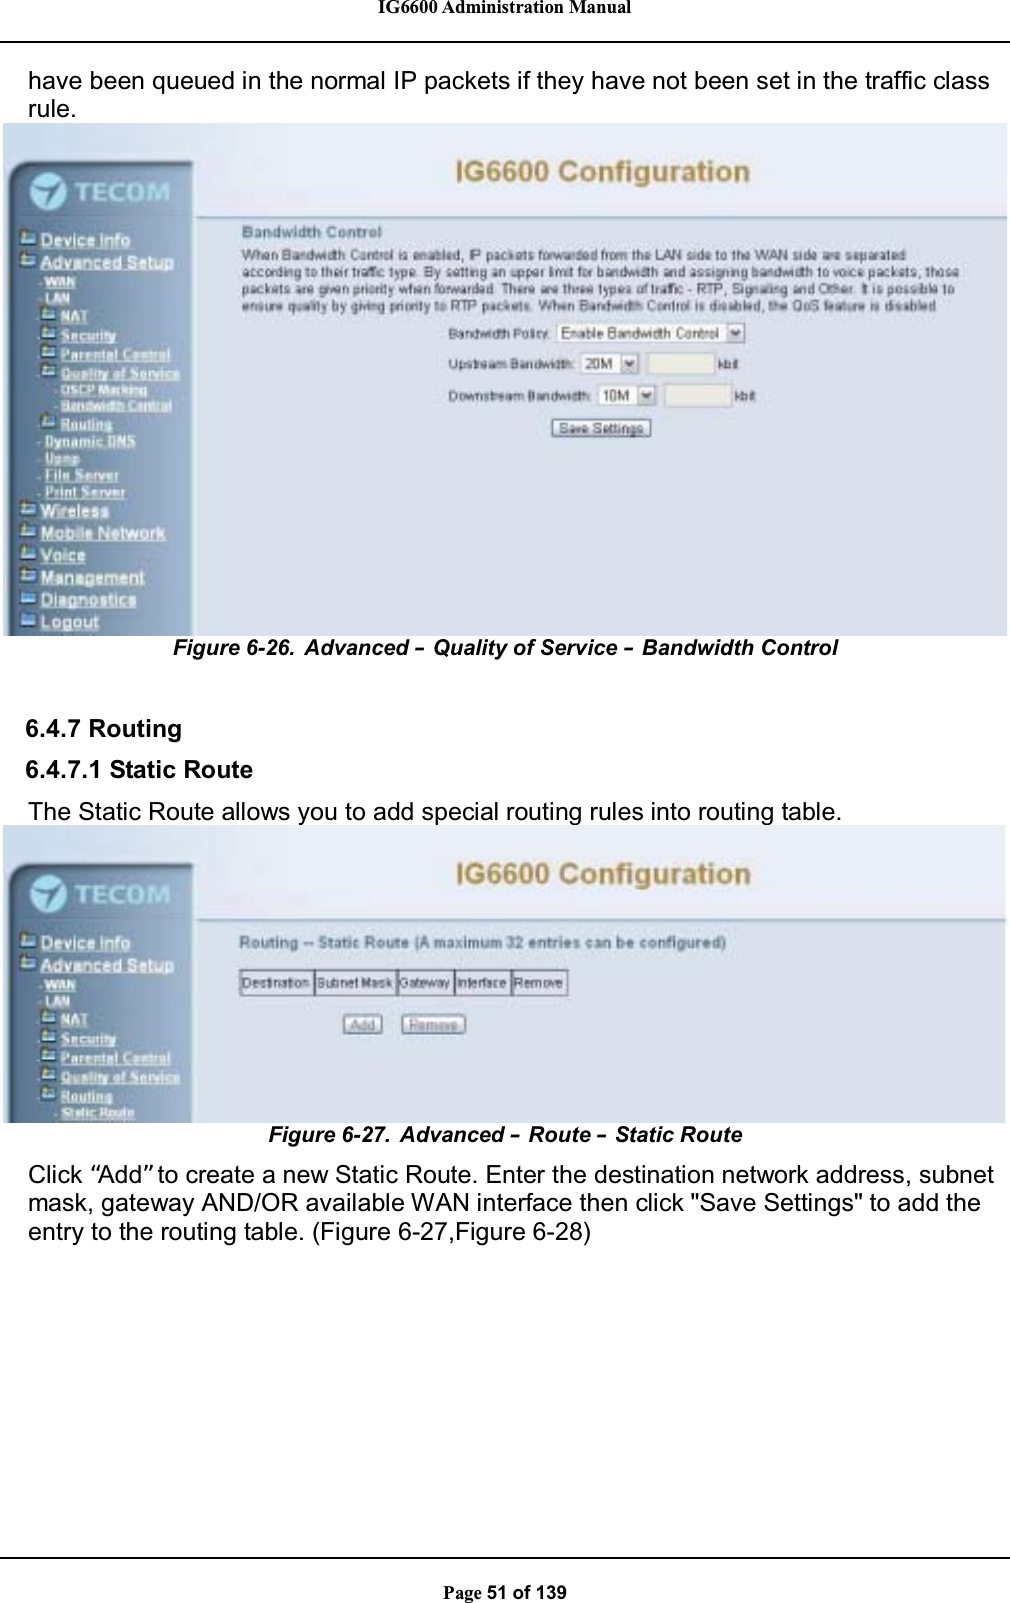 IG6600 Administration ManualPage 51 of 139have been queued in the normal IP packets if they have not been set in the traffic classrule.Figure 6-26. Advanced – Quality of Service –Bandwidth Control6.4.7 Routing6.4.7.1 Static RouteThe Static Route allows you to add special routing rules into routing table.Figure 6-27. Advanced –Route –Static RouteClick “Add” to create a new Static Route. Enter the destination network address, subnetmask, gateway AND/OR available WAN interface then click &quot;Save Settings&quot; to add theentry to the routing table. (Figure 6-27,Figure 6-28)